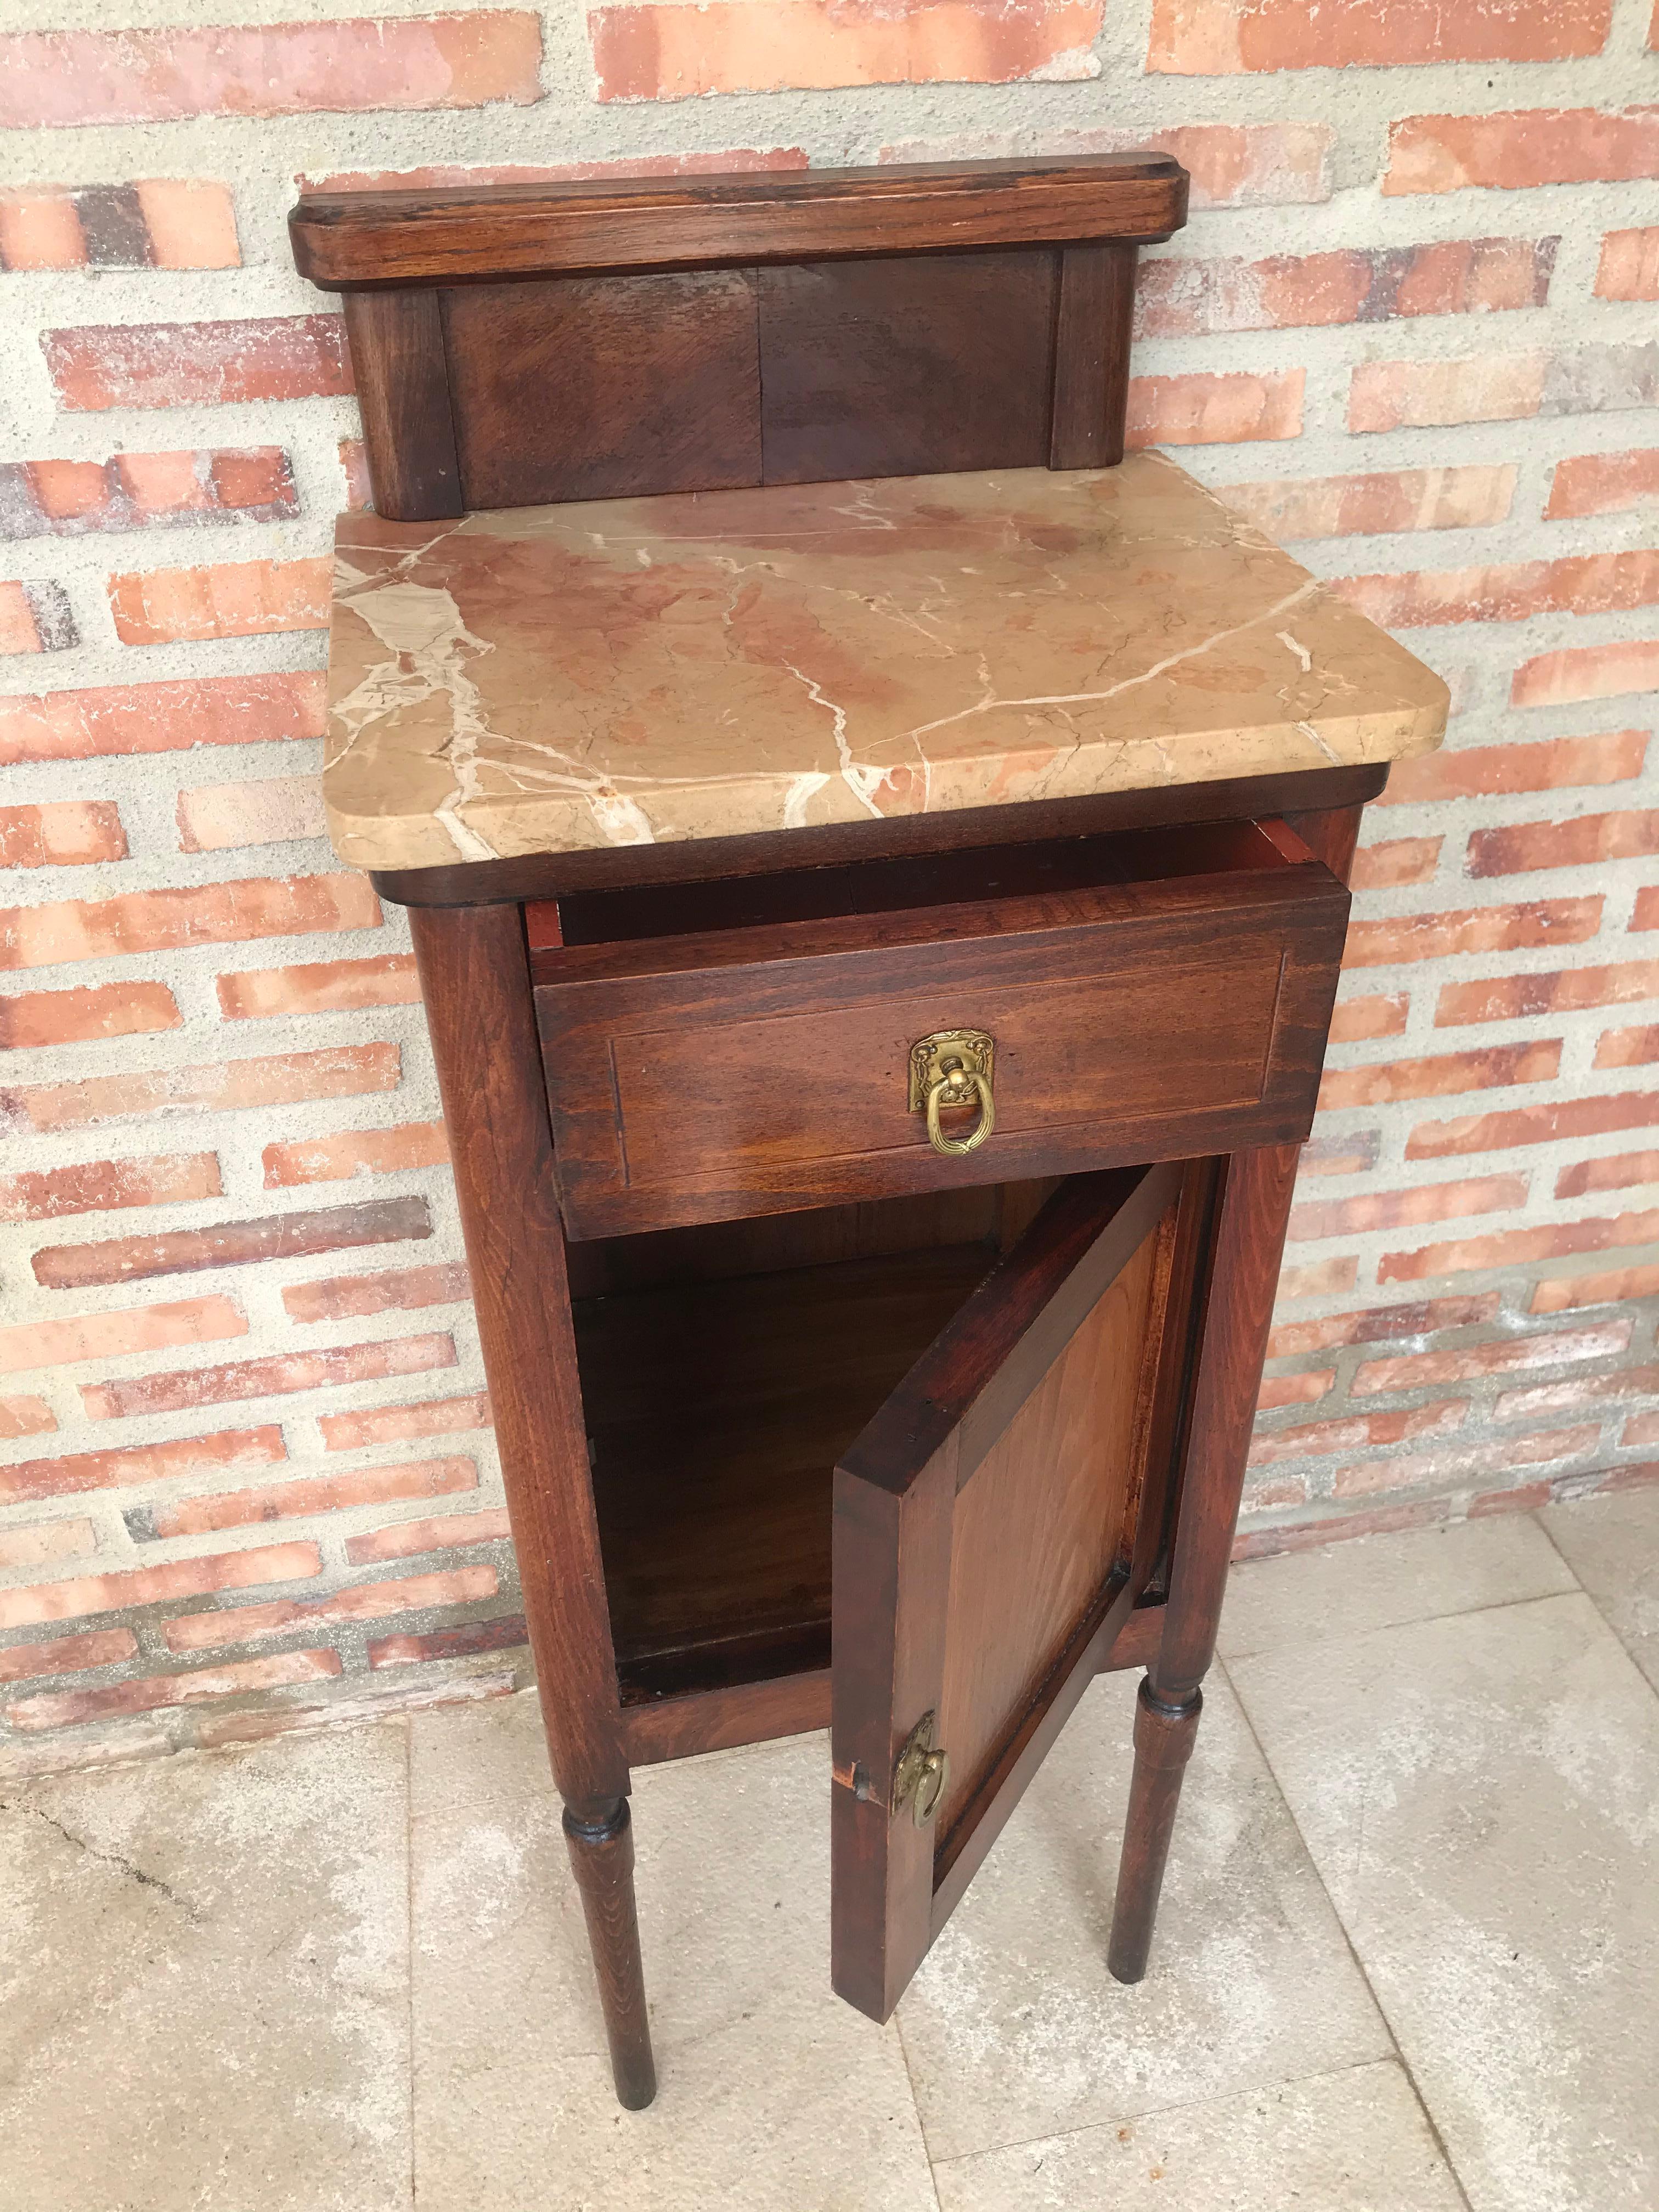 French Art Nouveau Walnut Nightstand with Crest, Marble Top and Glass Shelve For Sale